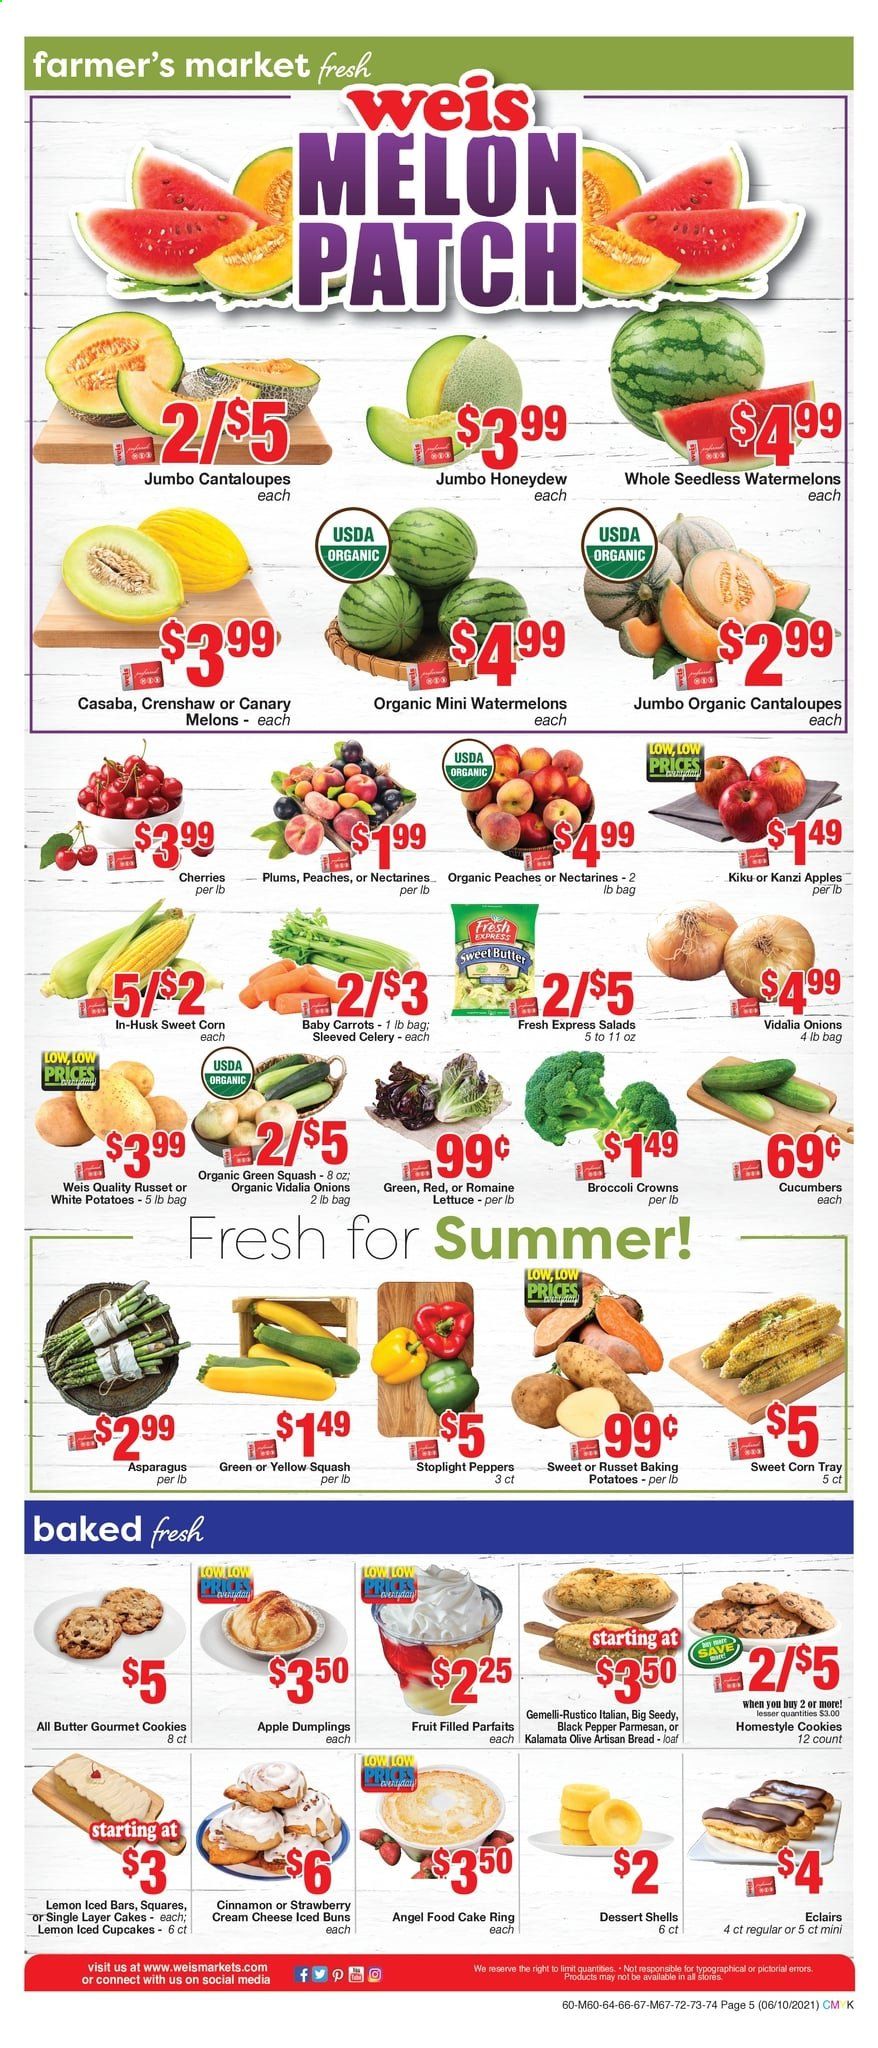 thumbnail - Weis Flyer - 06/10/2021 - 07/15/2021 - Sales products - plums, bread, cake, buns, cupcake, Angel Food, dessert shells, asparagus, cantaloupe, carrots, celery, corn, cucumber, russet potatoes, zucchini, potatoes, onion, lettuce, peppers, sweet corn, sleeved celery, yellow squash, apples, honeydew, dumplings, cream cheese, parmesan, cheese, cookies, black pepper, cinnamon, cake form, tray, nectarines, melons, peaches. Page 5.